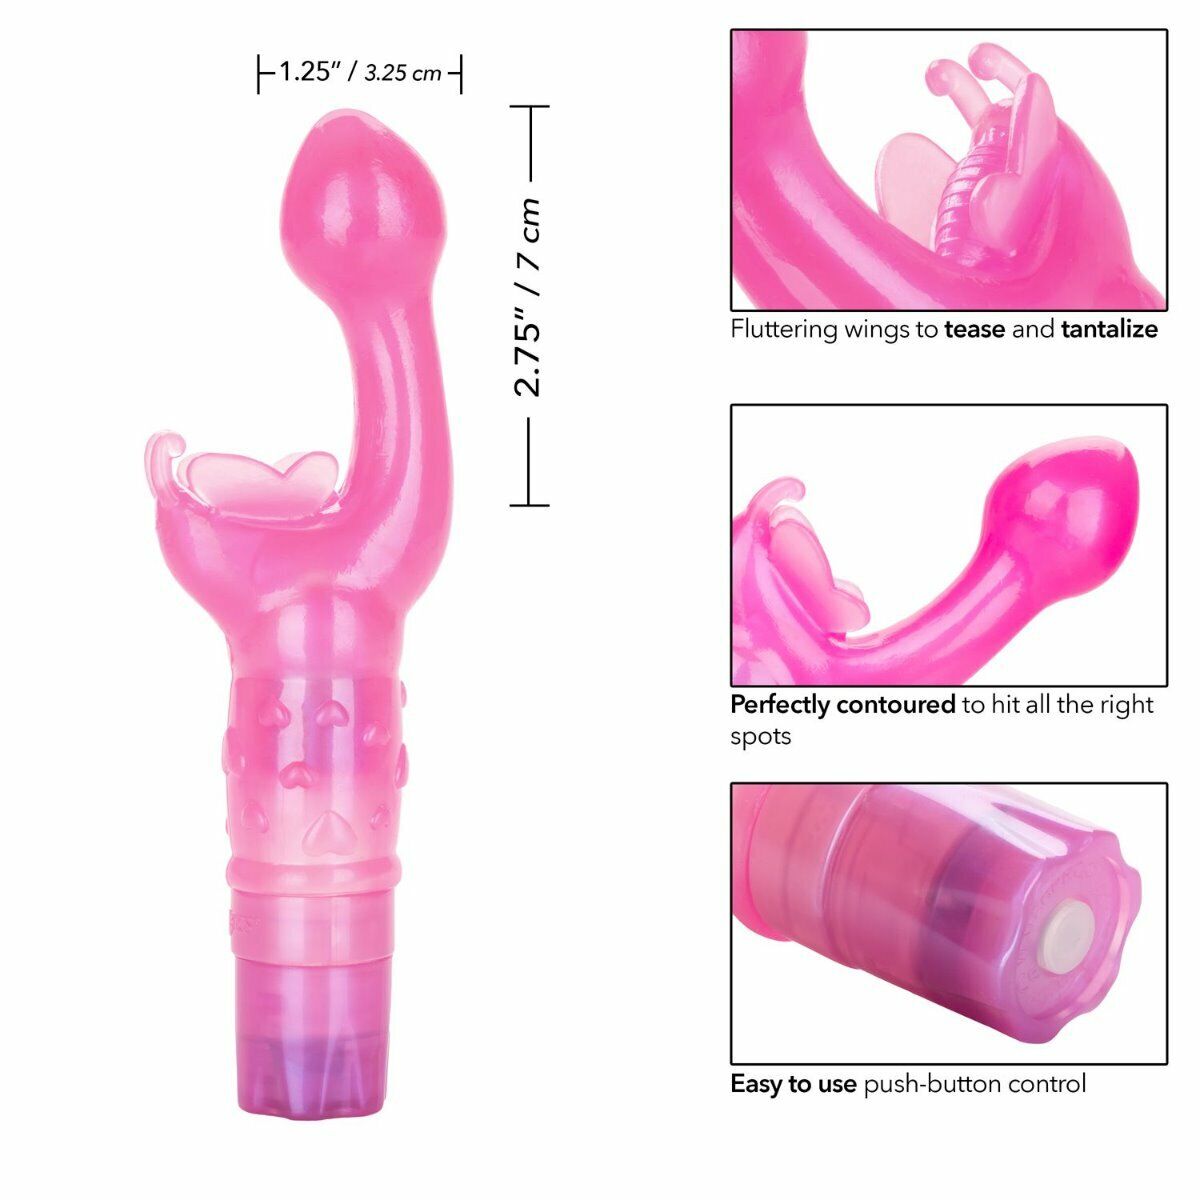 The Original Butterfly Kiss Female Clit G-spot Climax Vibe Vibrator Sex Toy